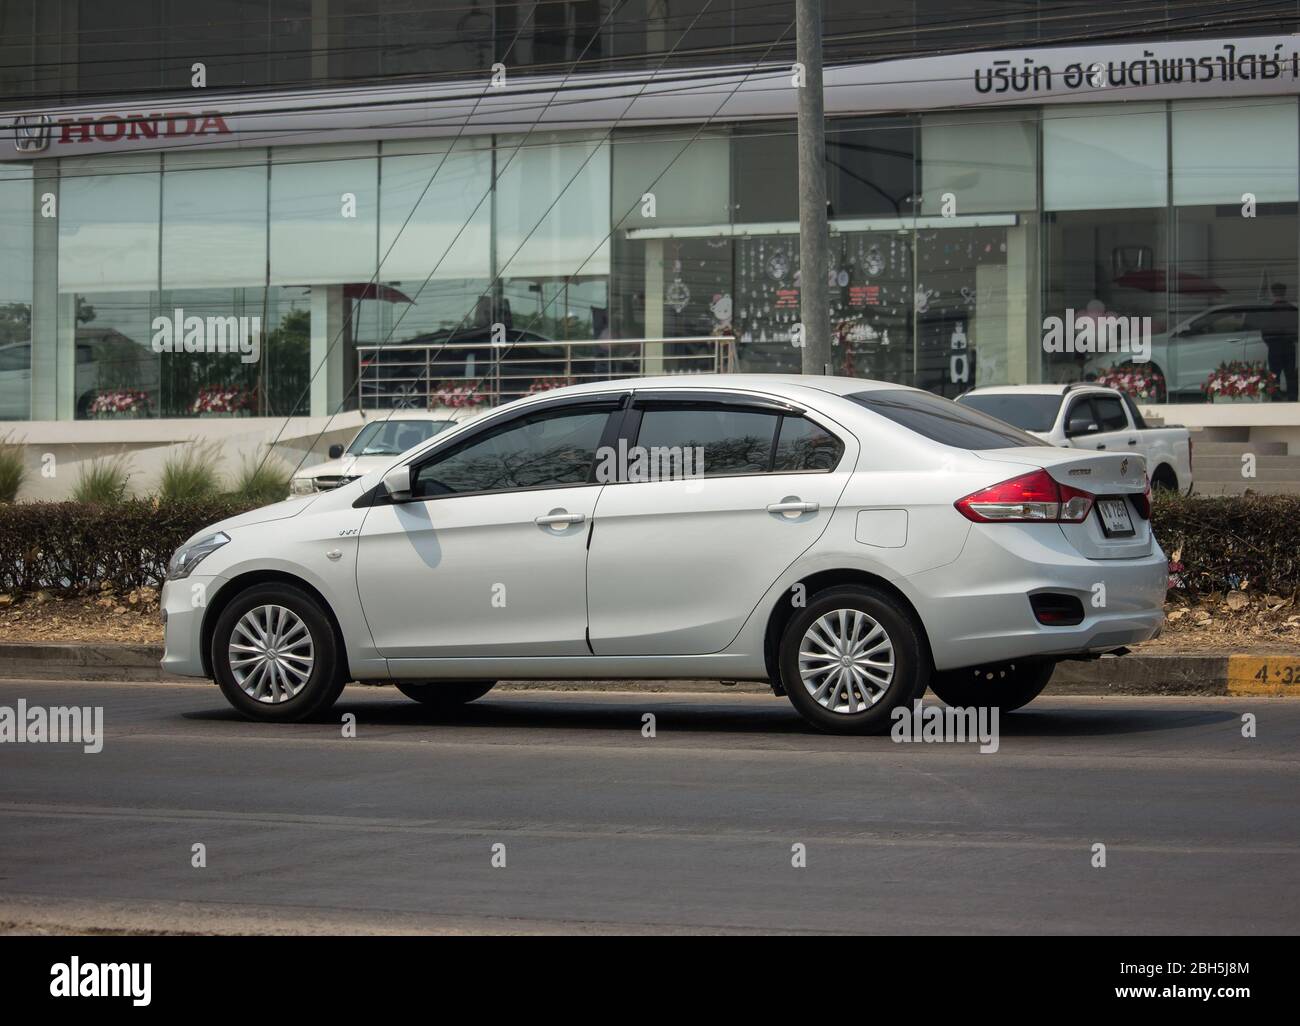 Suzuki Ciaz High Resolution Stock Photography And Images Alamy